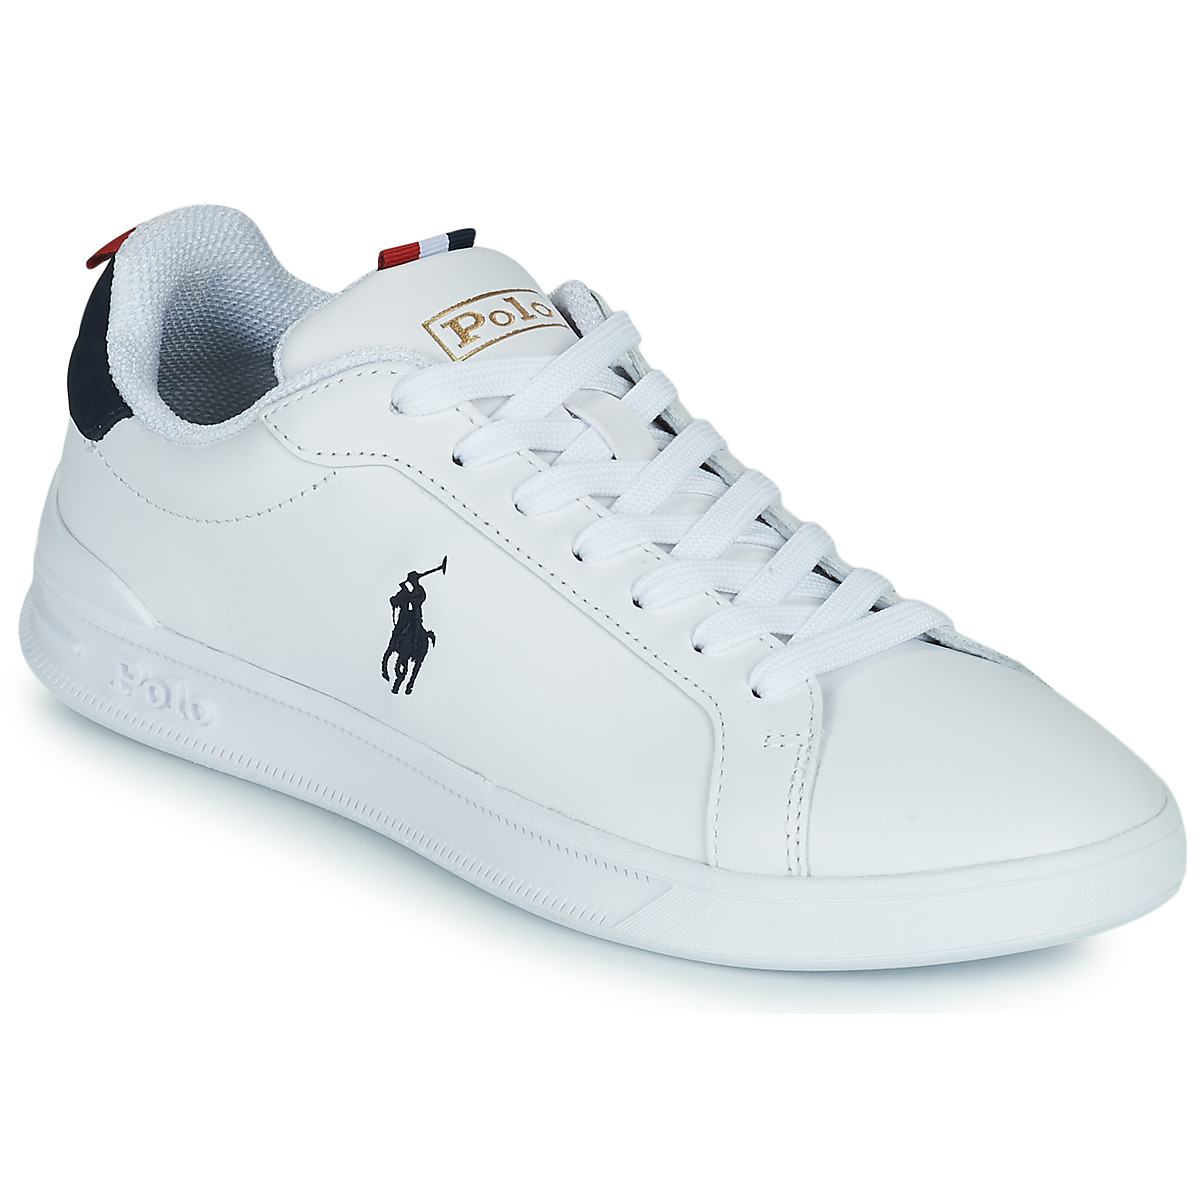 Chaussures Baskets basses dept_Clothing Grey pens polo-shirts office-accessories clothing HRT CT II Blanc